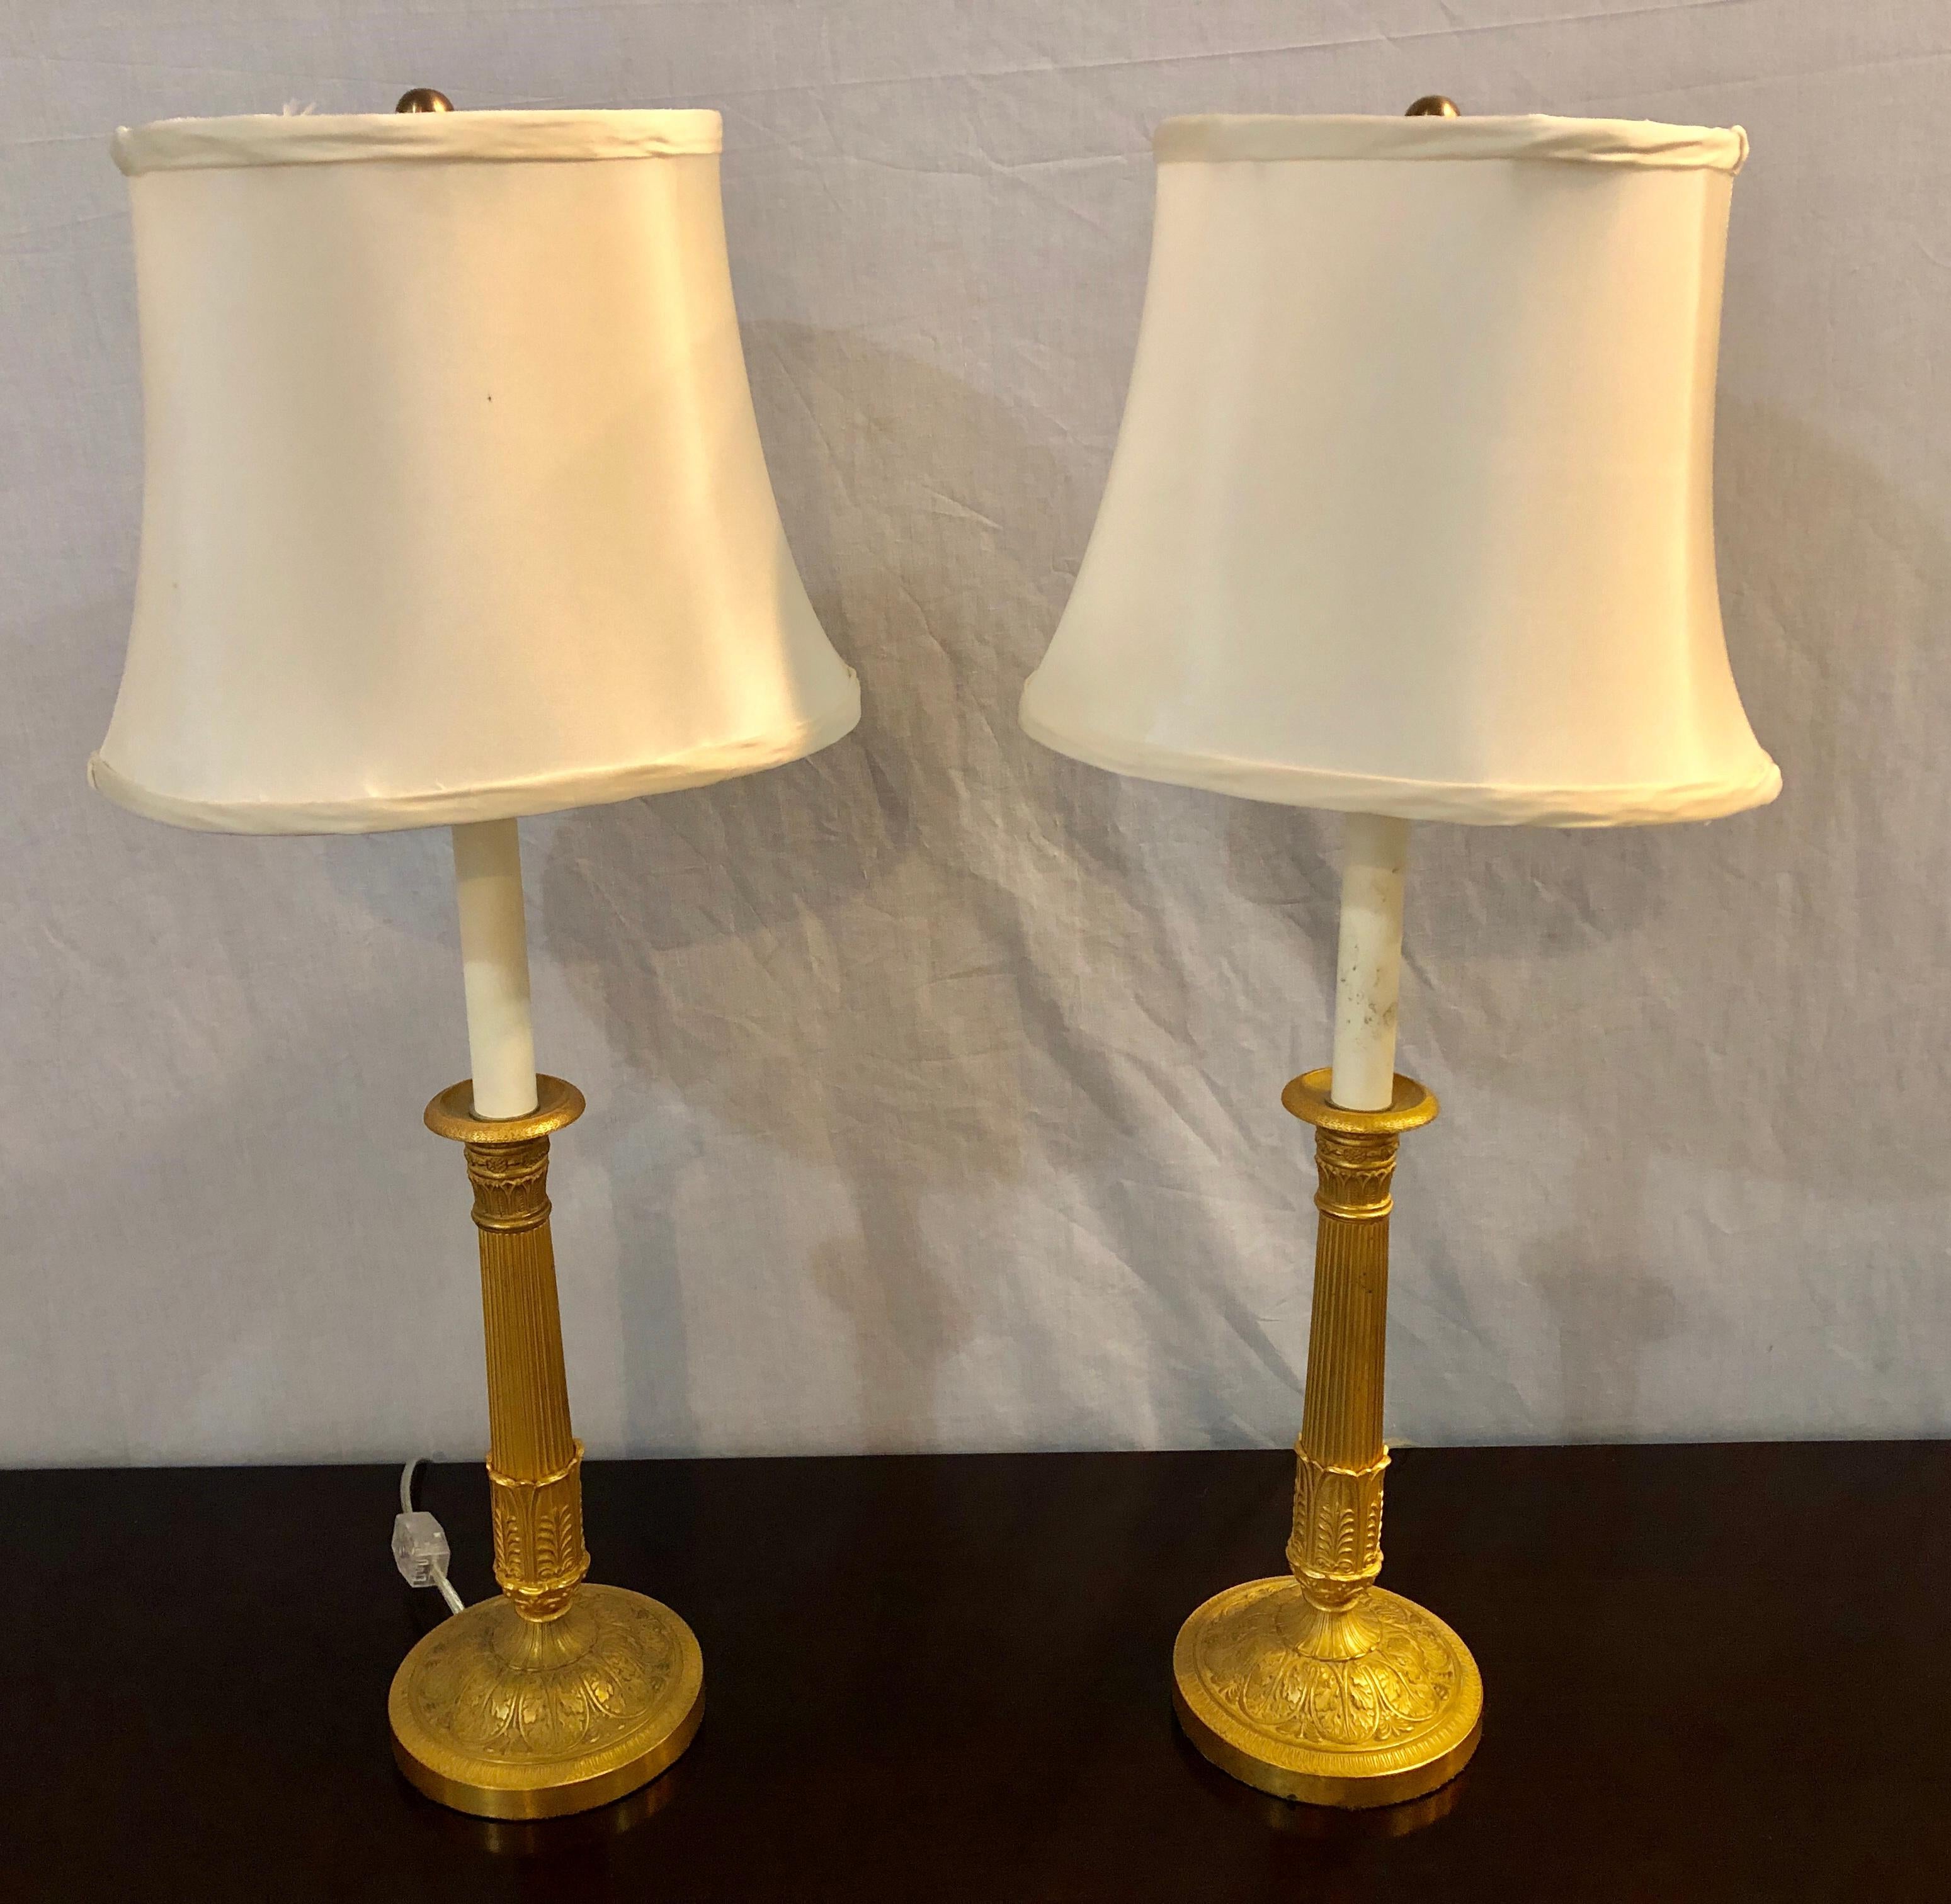 Quality abounds on this fine pair of Empire bronze candleprick late 19th century table lamps with custom silk Diane Studio engraved shades. These finely crafted dore bronze tables lamps take one bulb.

Shades: 8 inches high, 10.5 inches diameter.